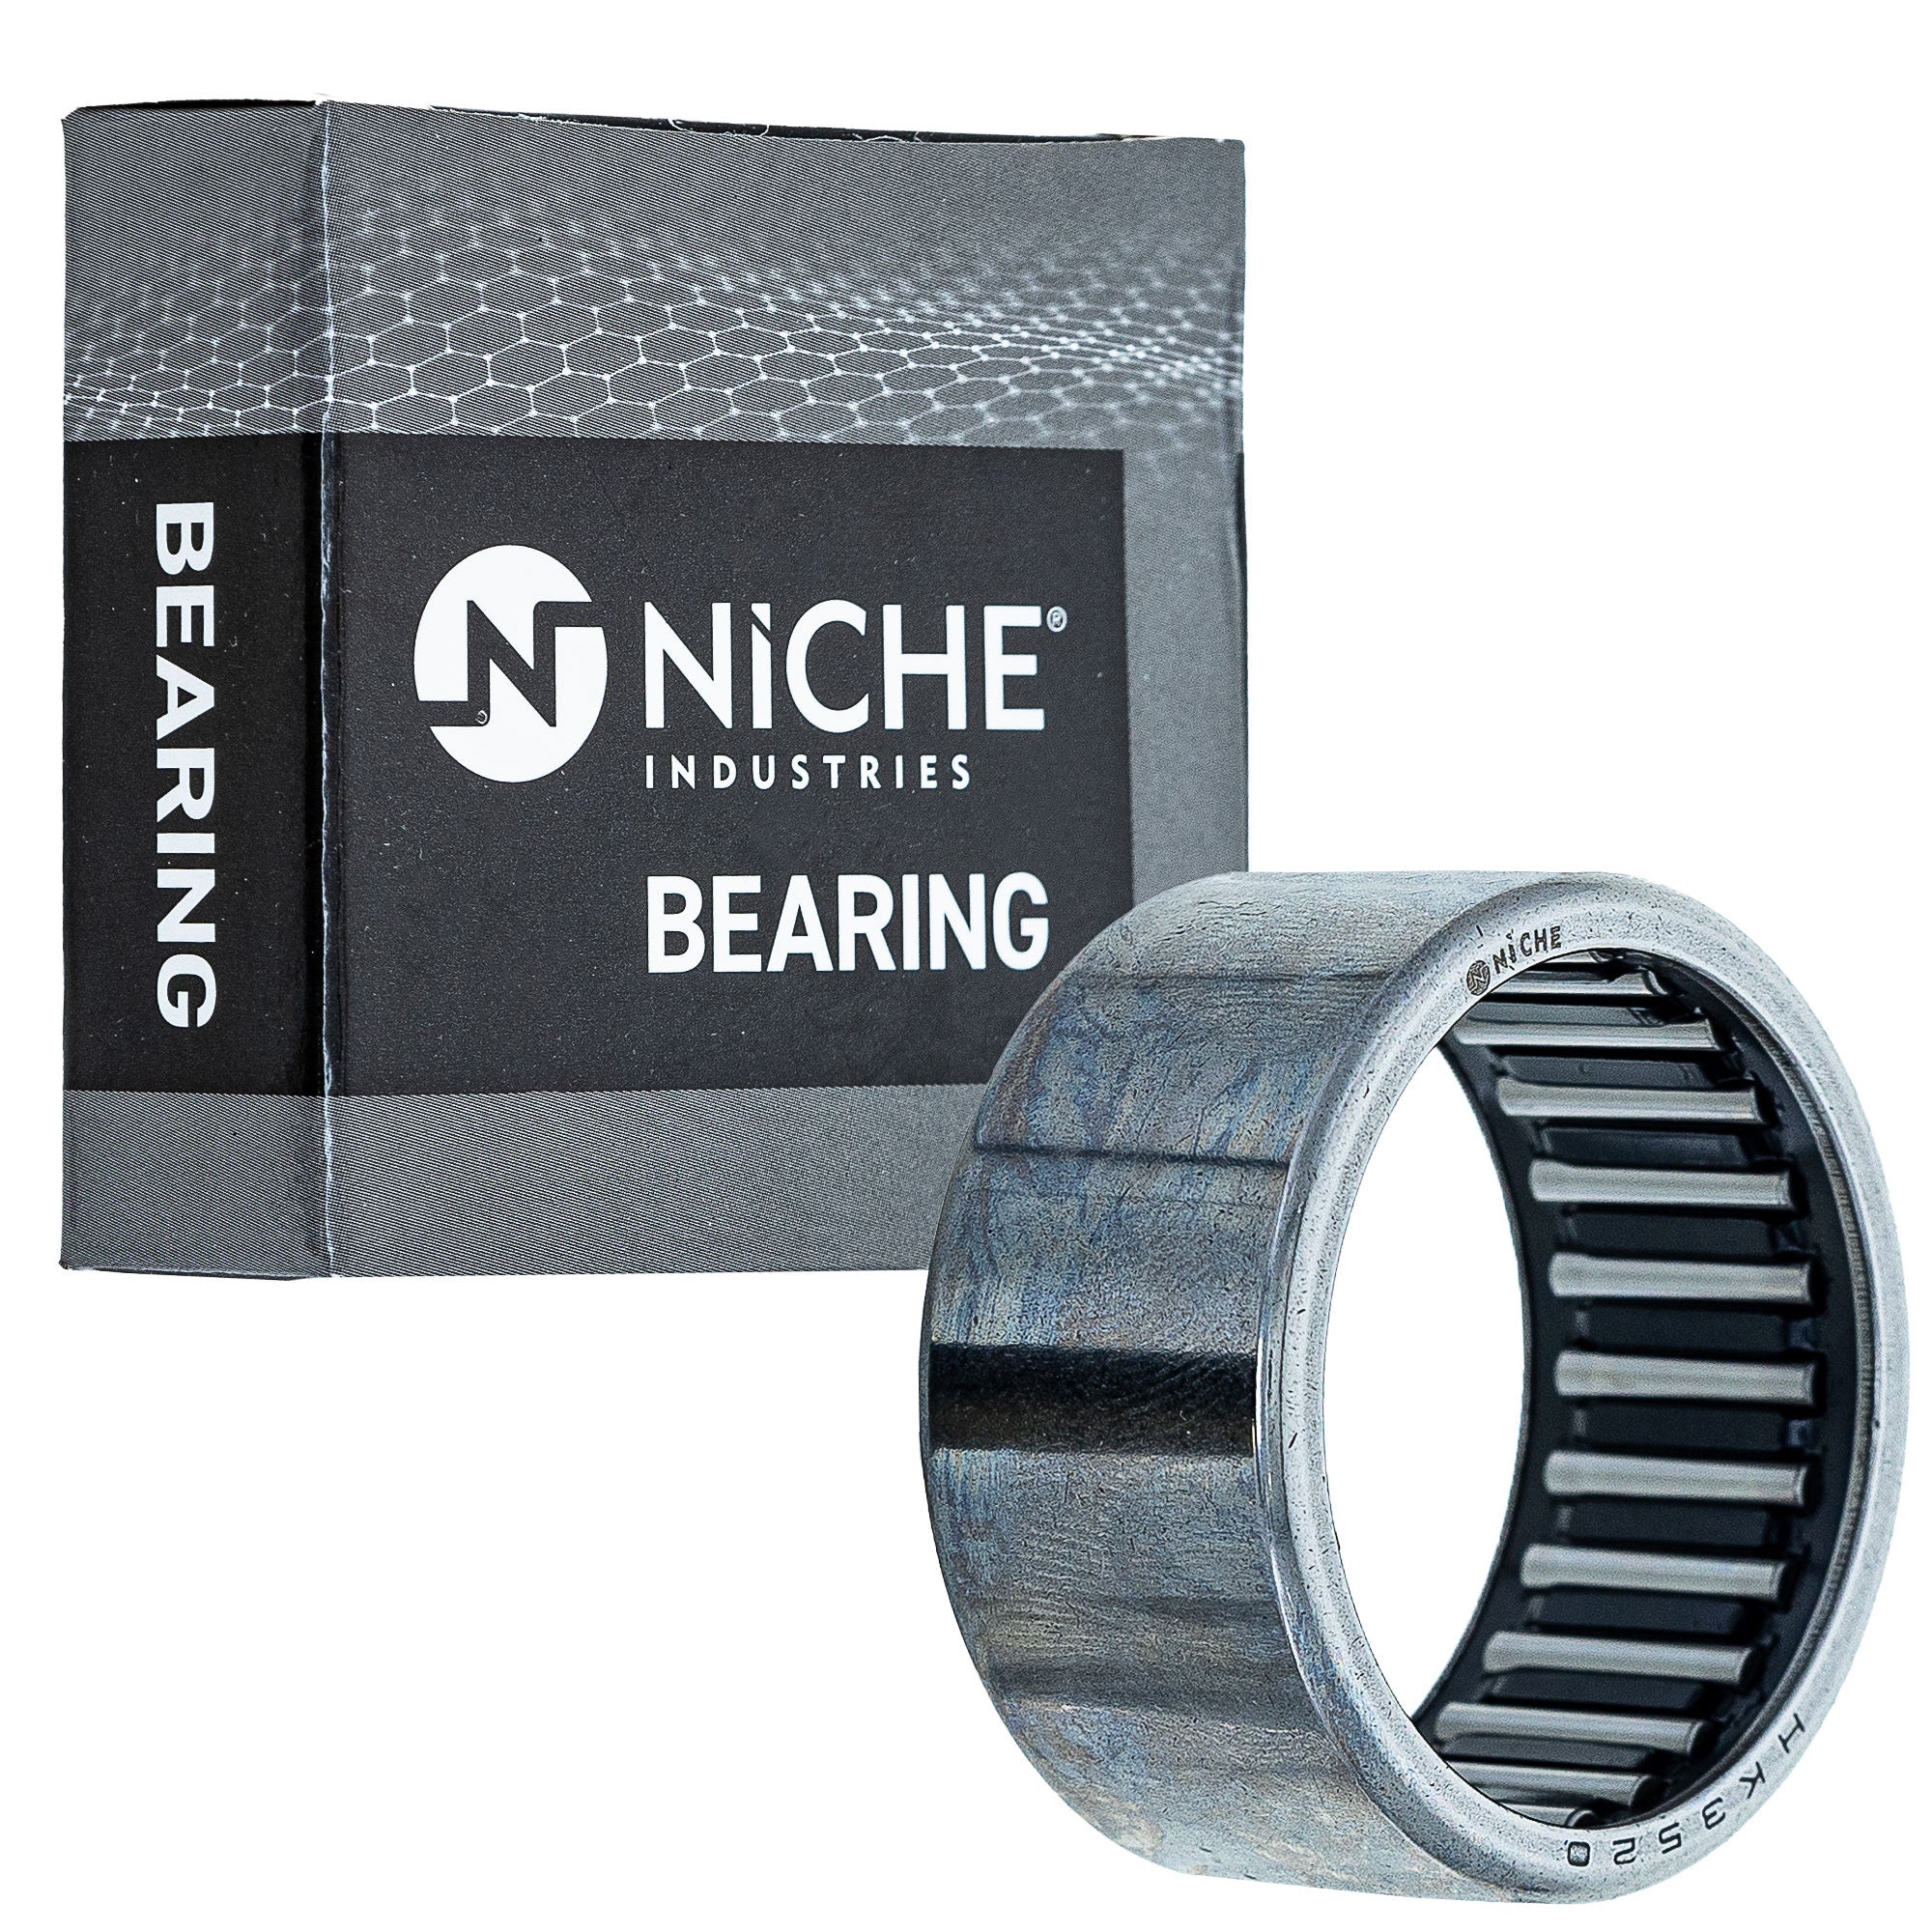 NICHE 519-CBB2294R Bearing 2-Pack for zOTHER YZF FZ1